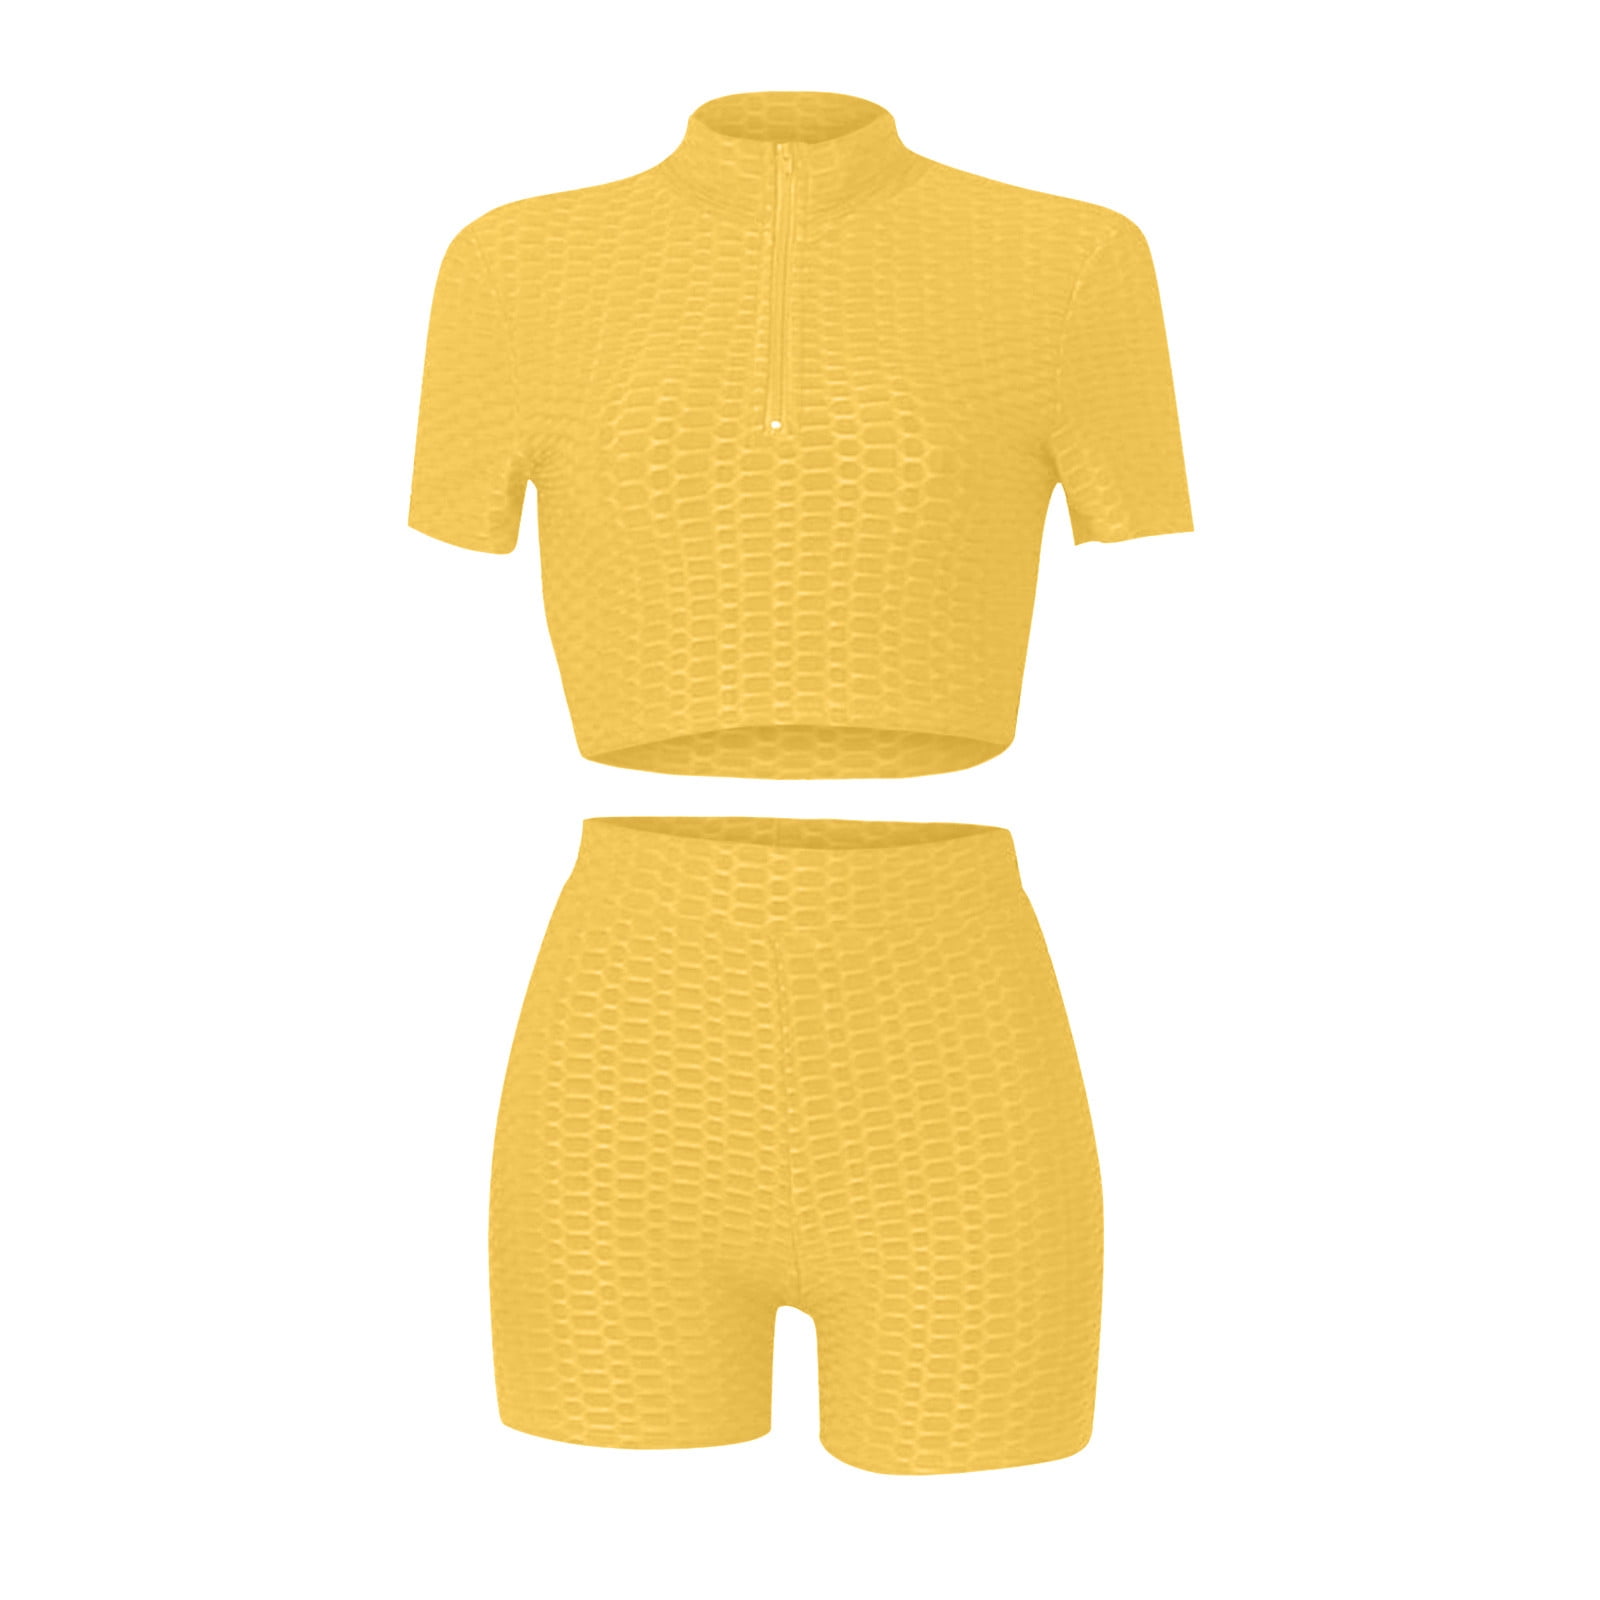 REORIAFEE Cute Outfits for Women 70s Outfits Women's